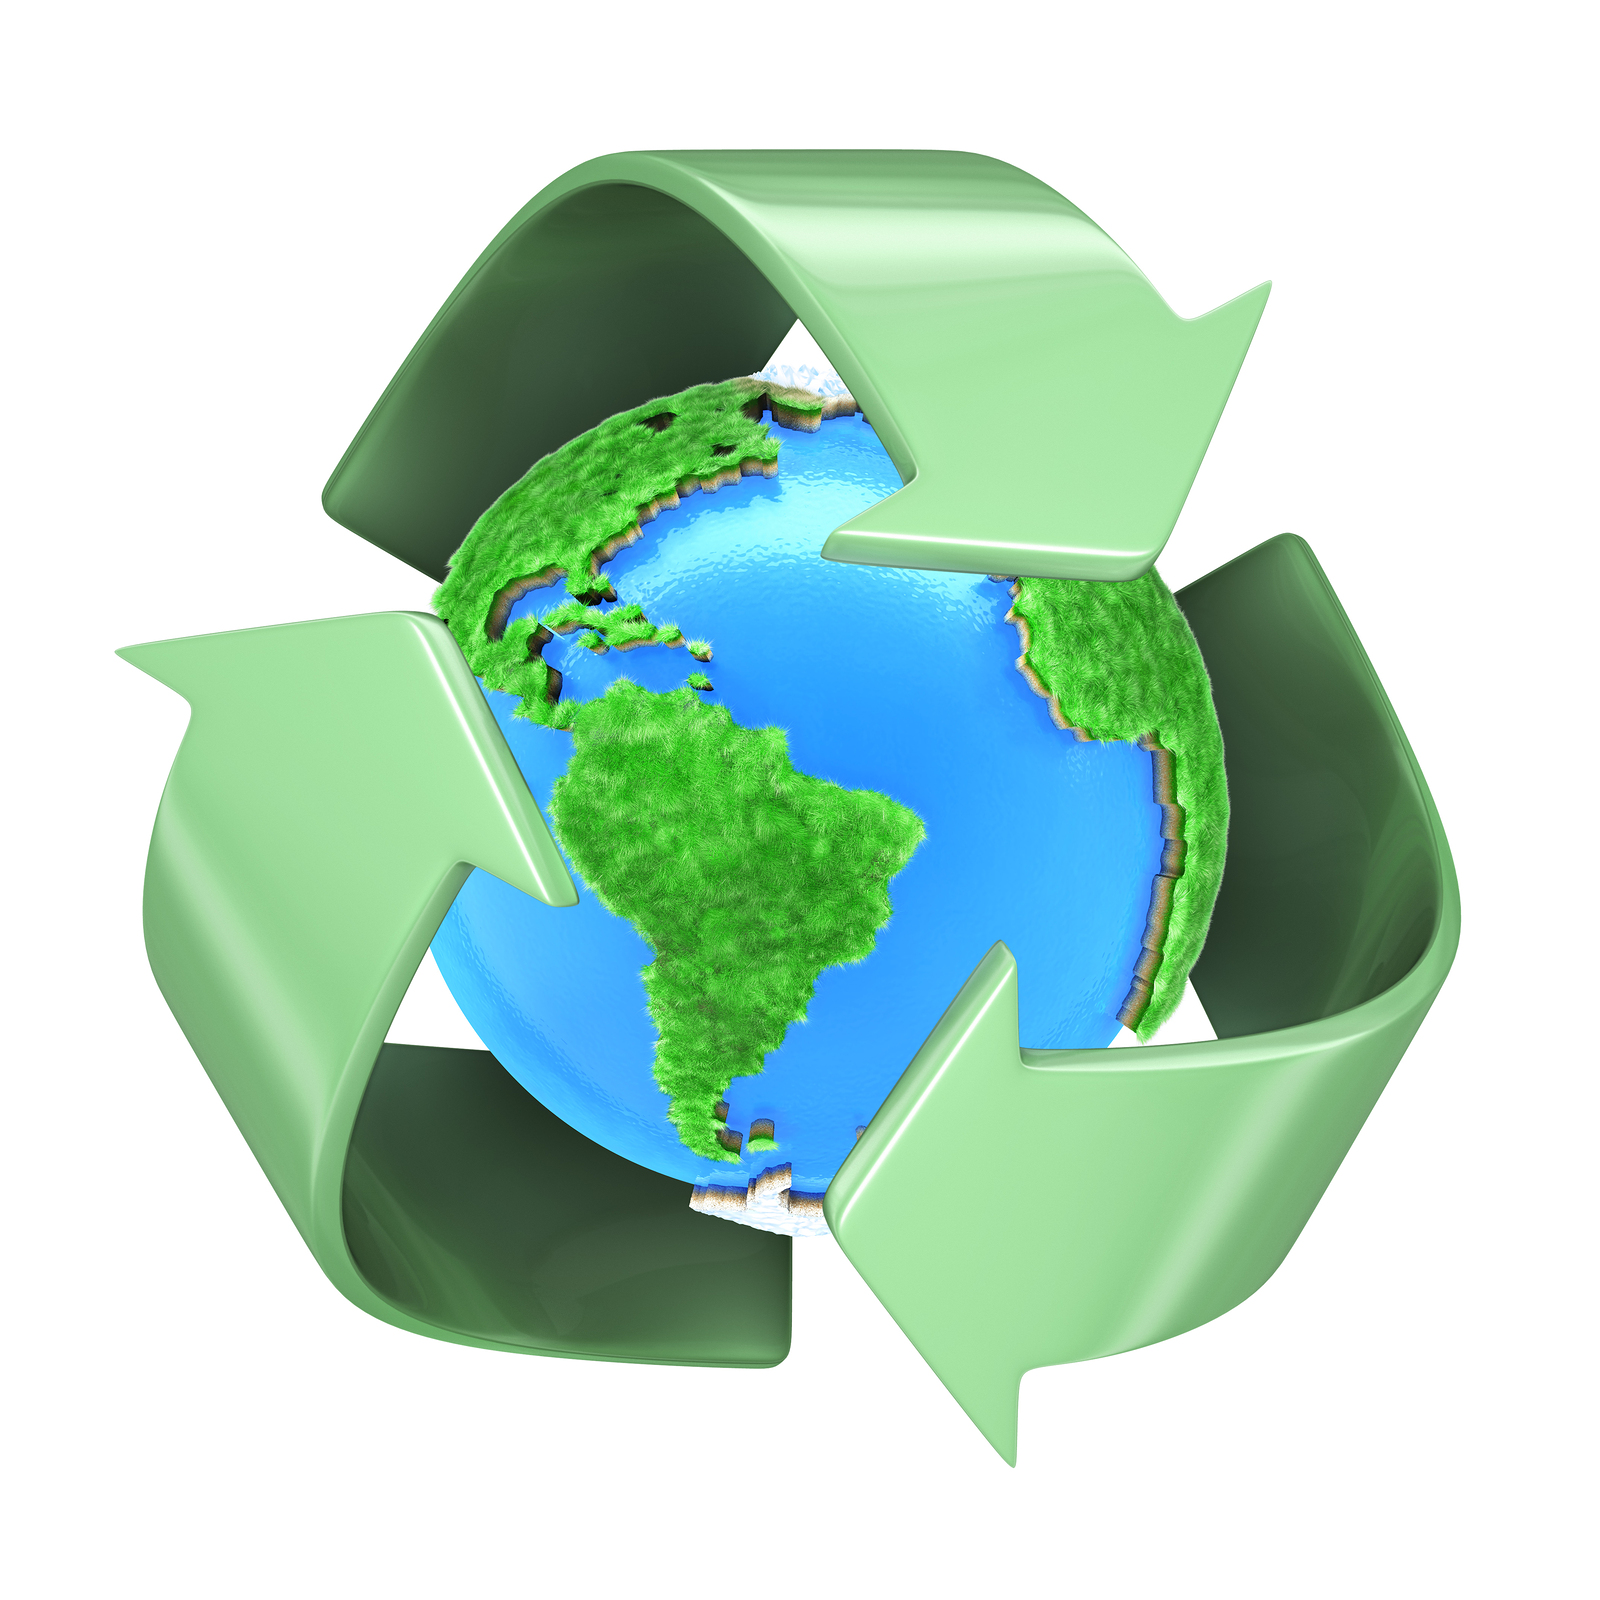 Recycling is important « recycling guide